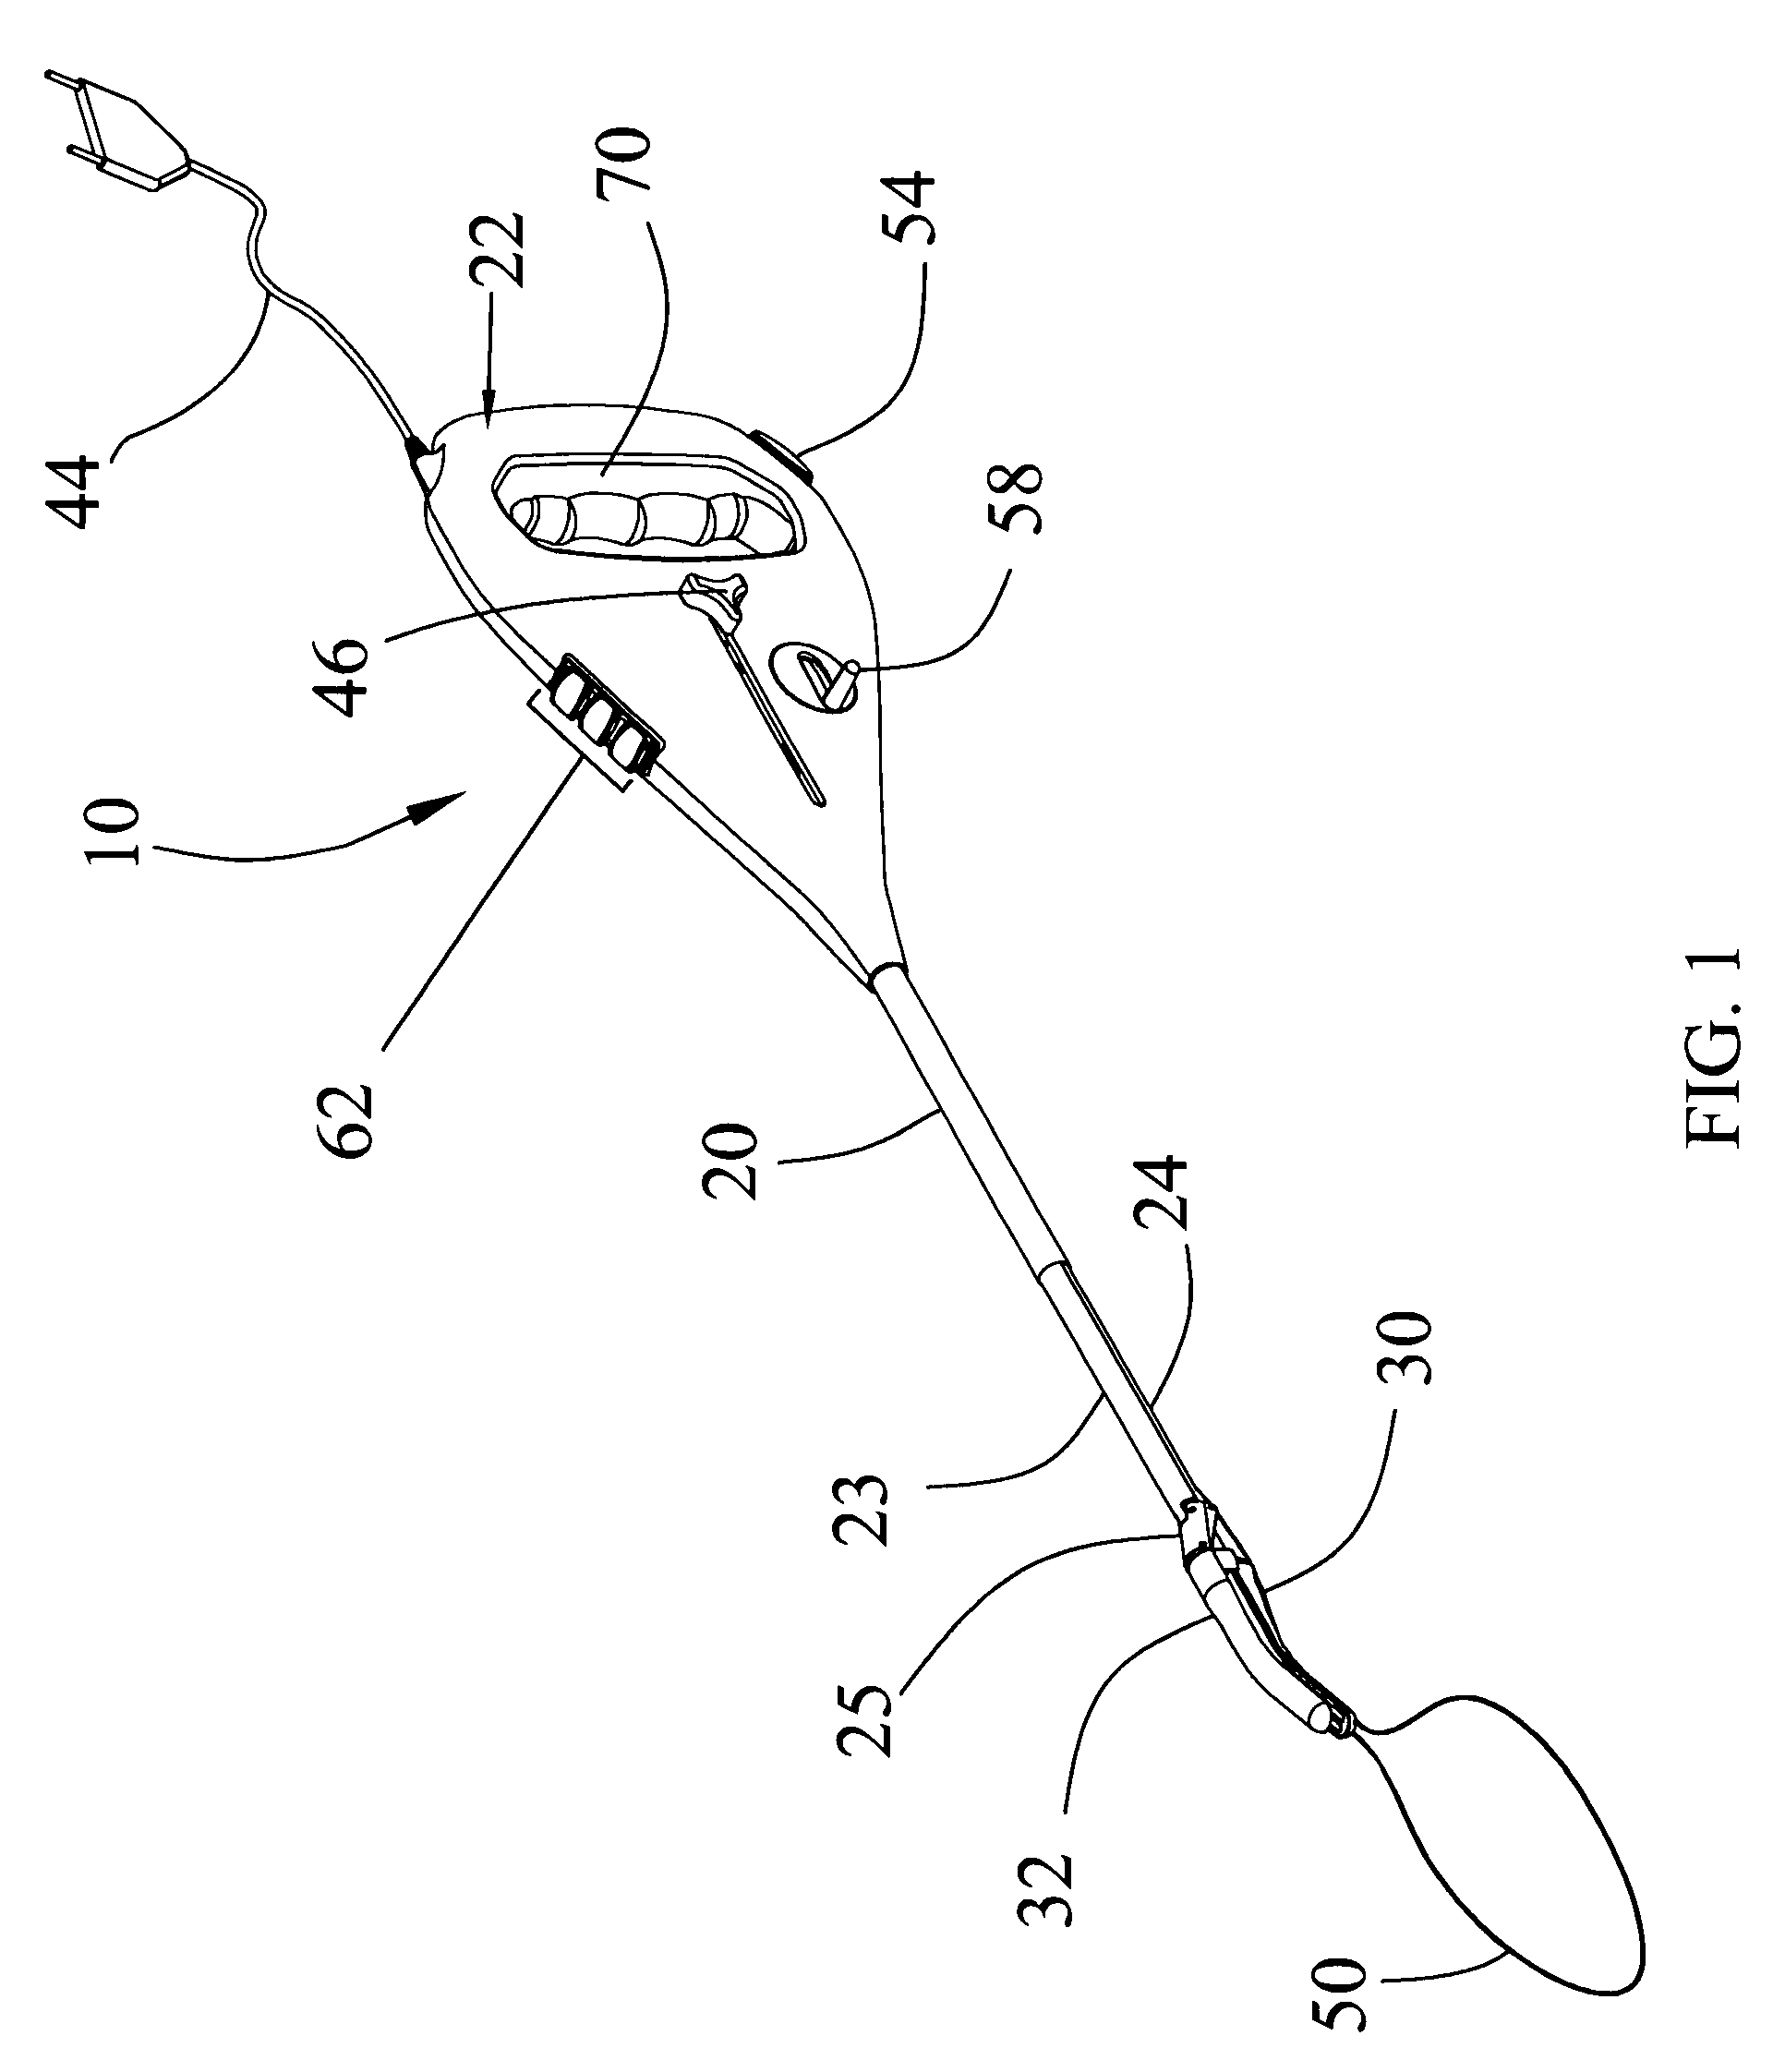 Resecting device